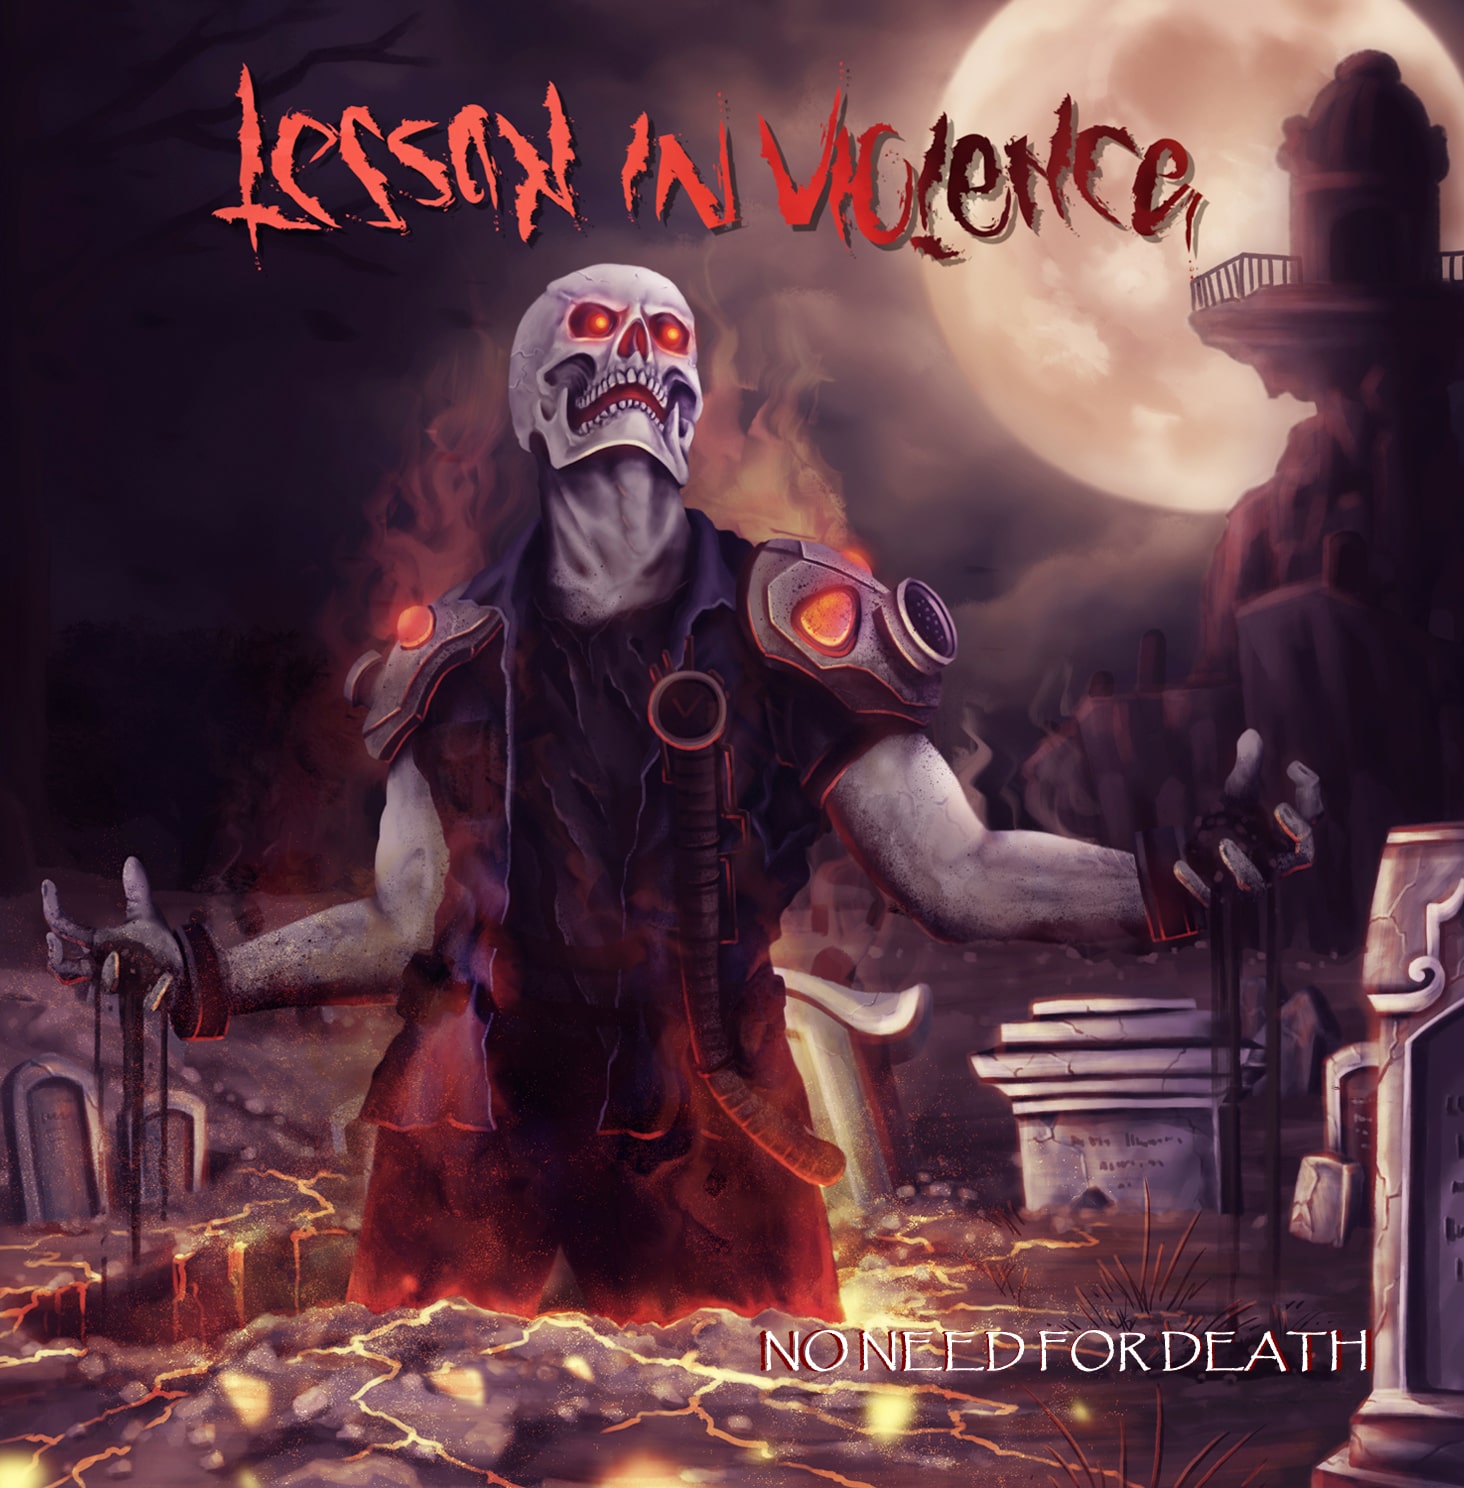 Cover of the album no need for death